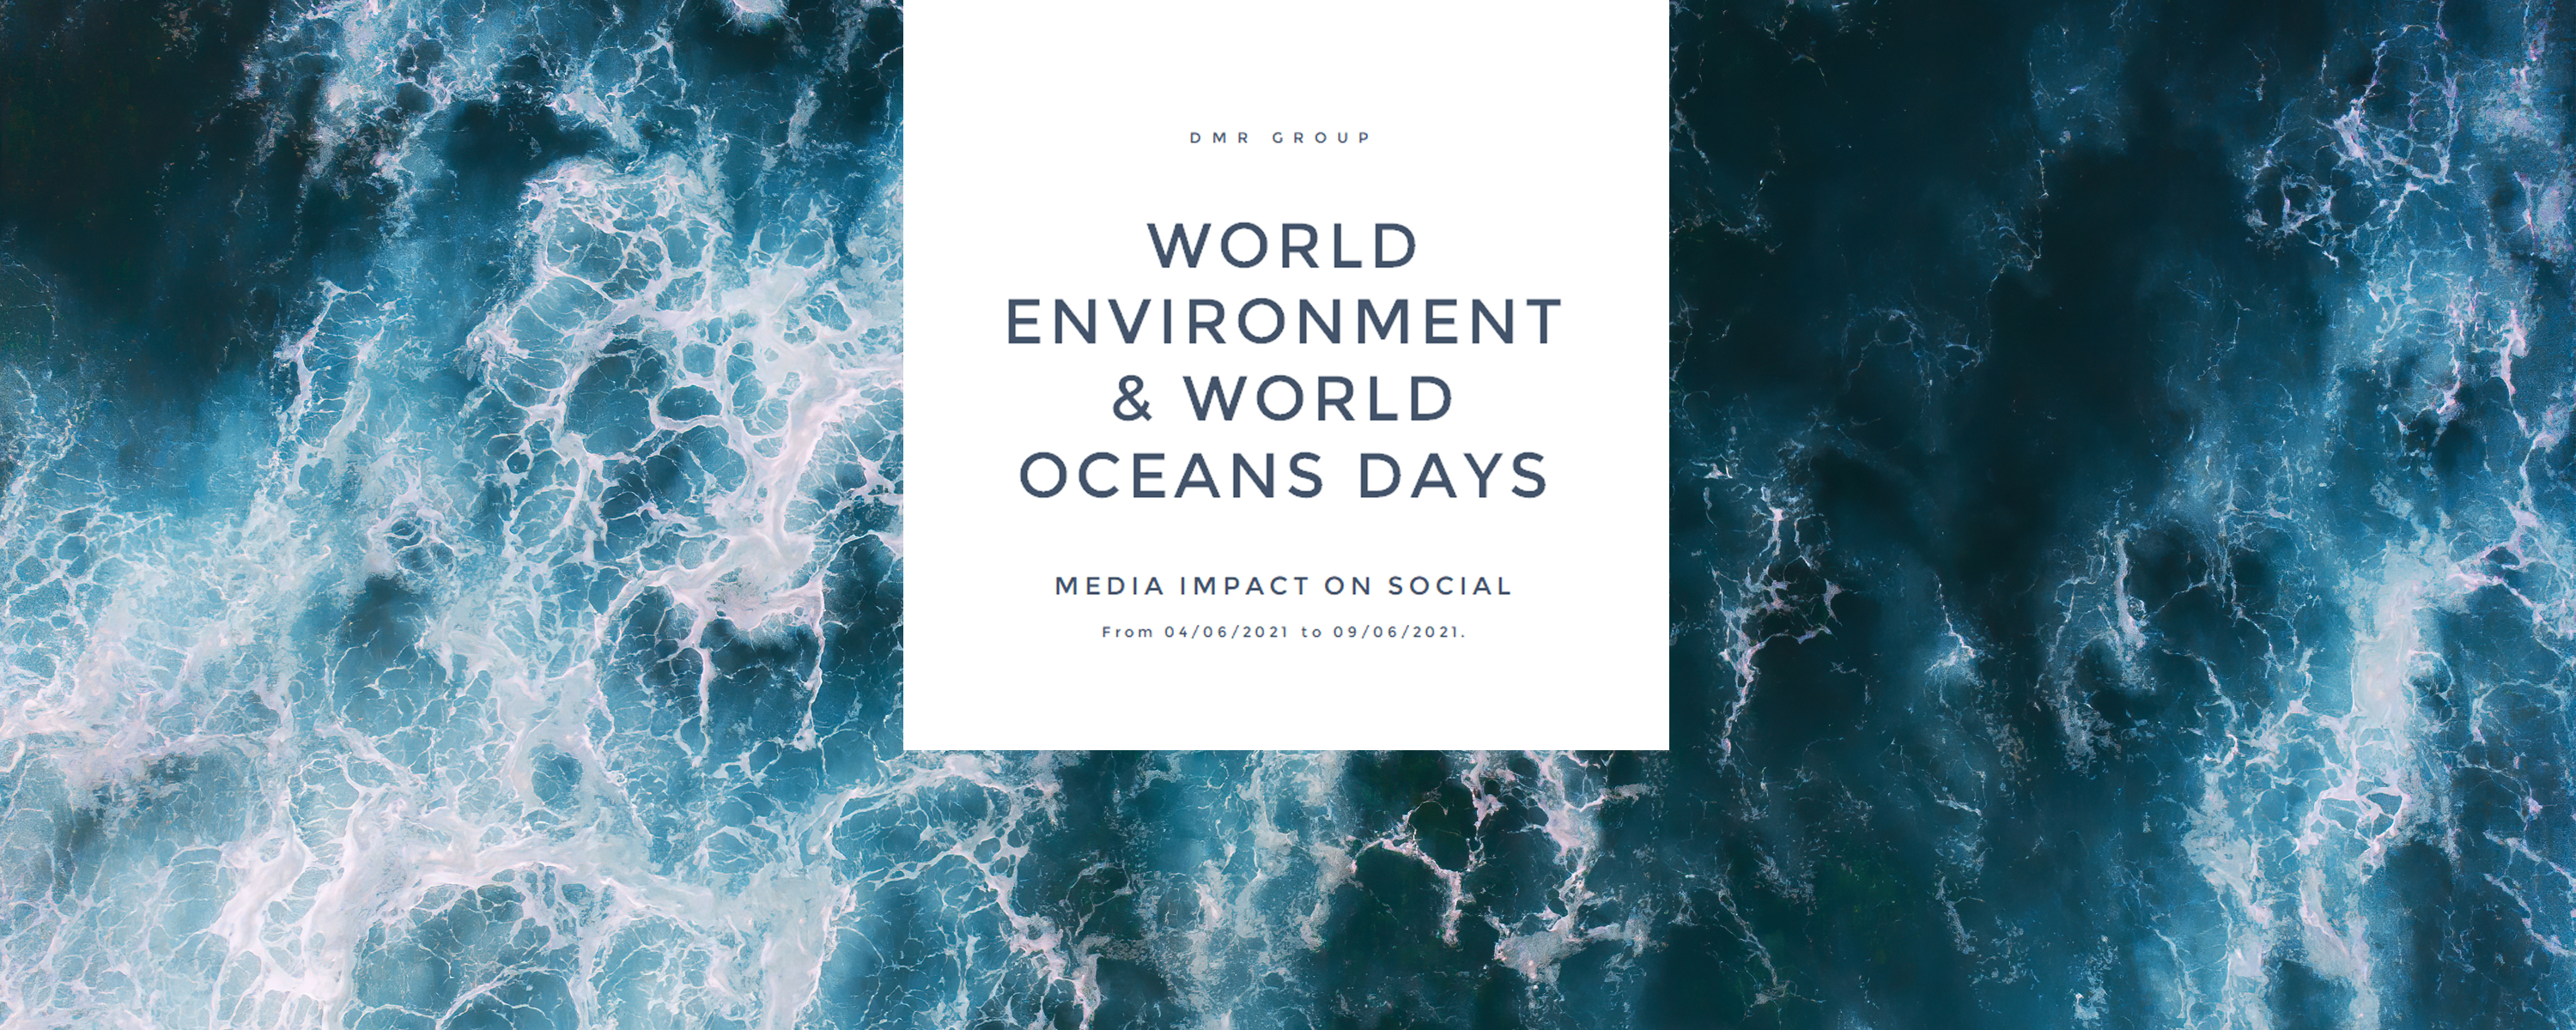 World Environment Day and World Oceans Day